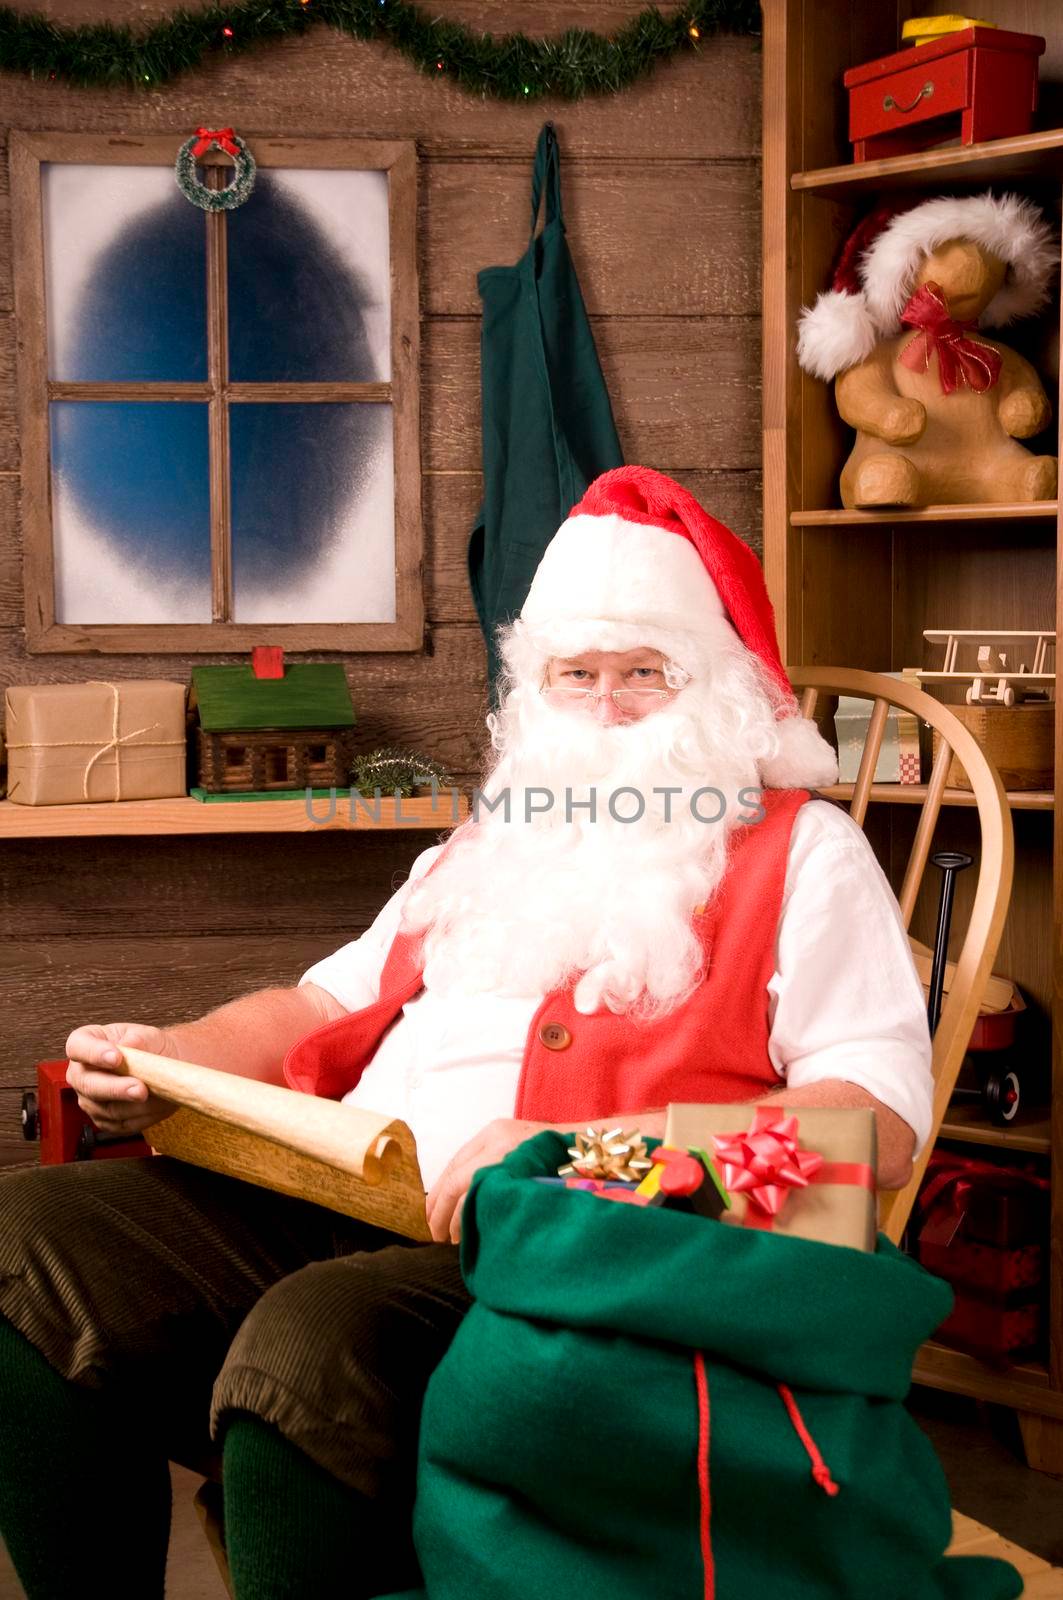 Santa Claus in Rocking Chair with Naughty List and Bag of Toys, vertical composition